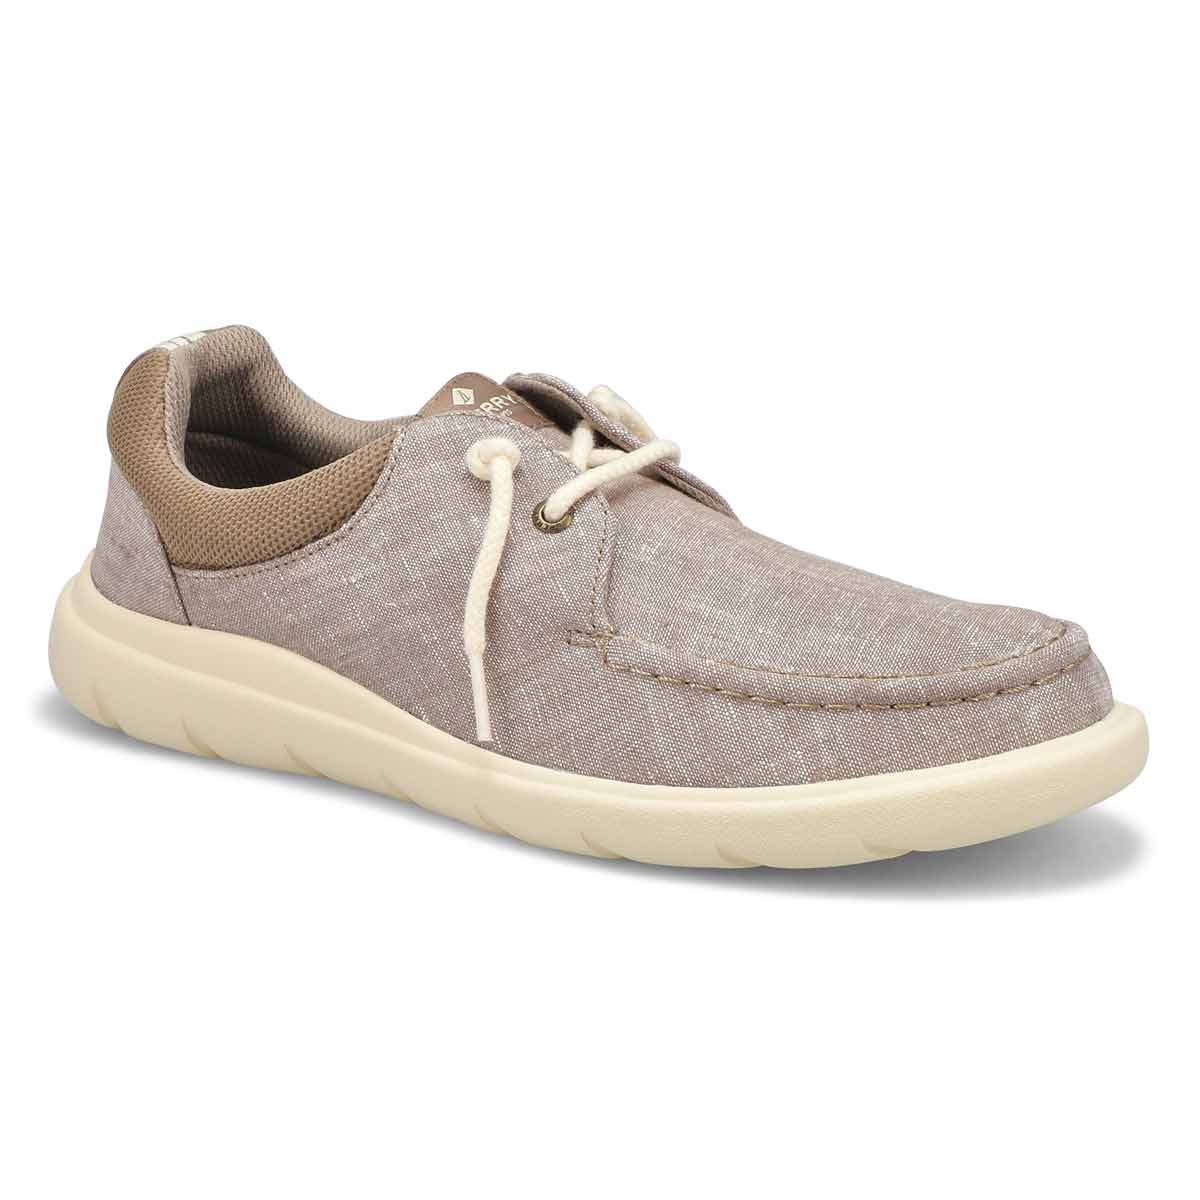 Sperry Men's Captains Moc Chambray Boat Shoe | SoftMoc.com